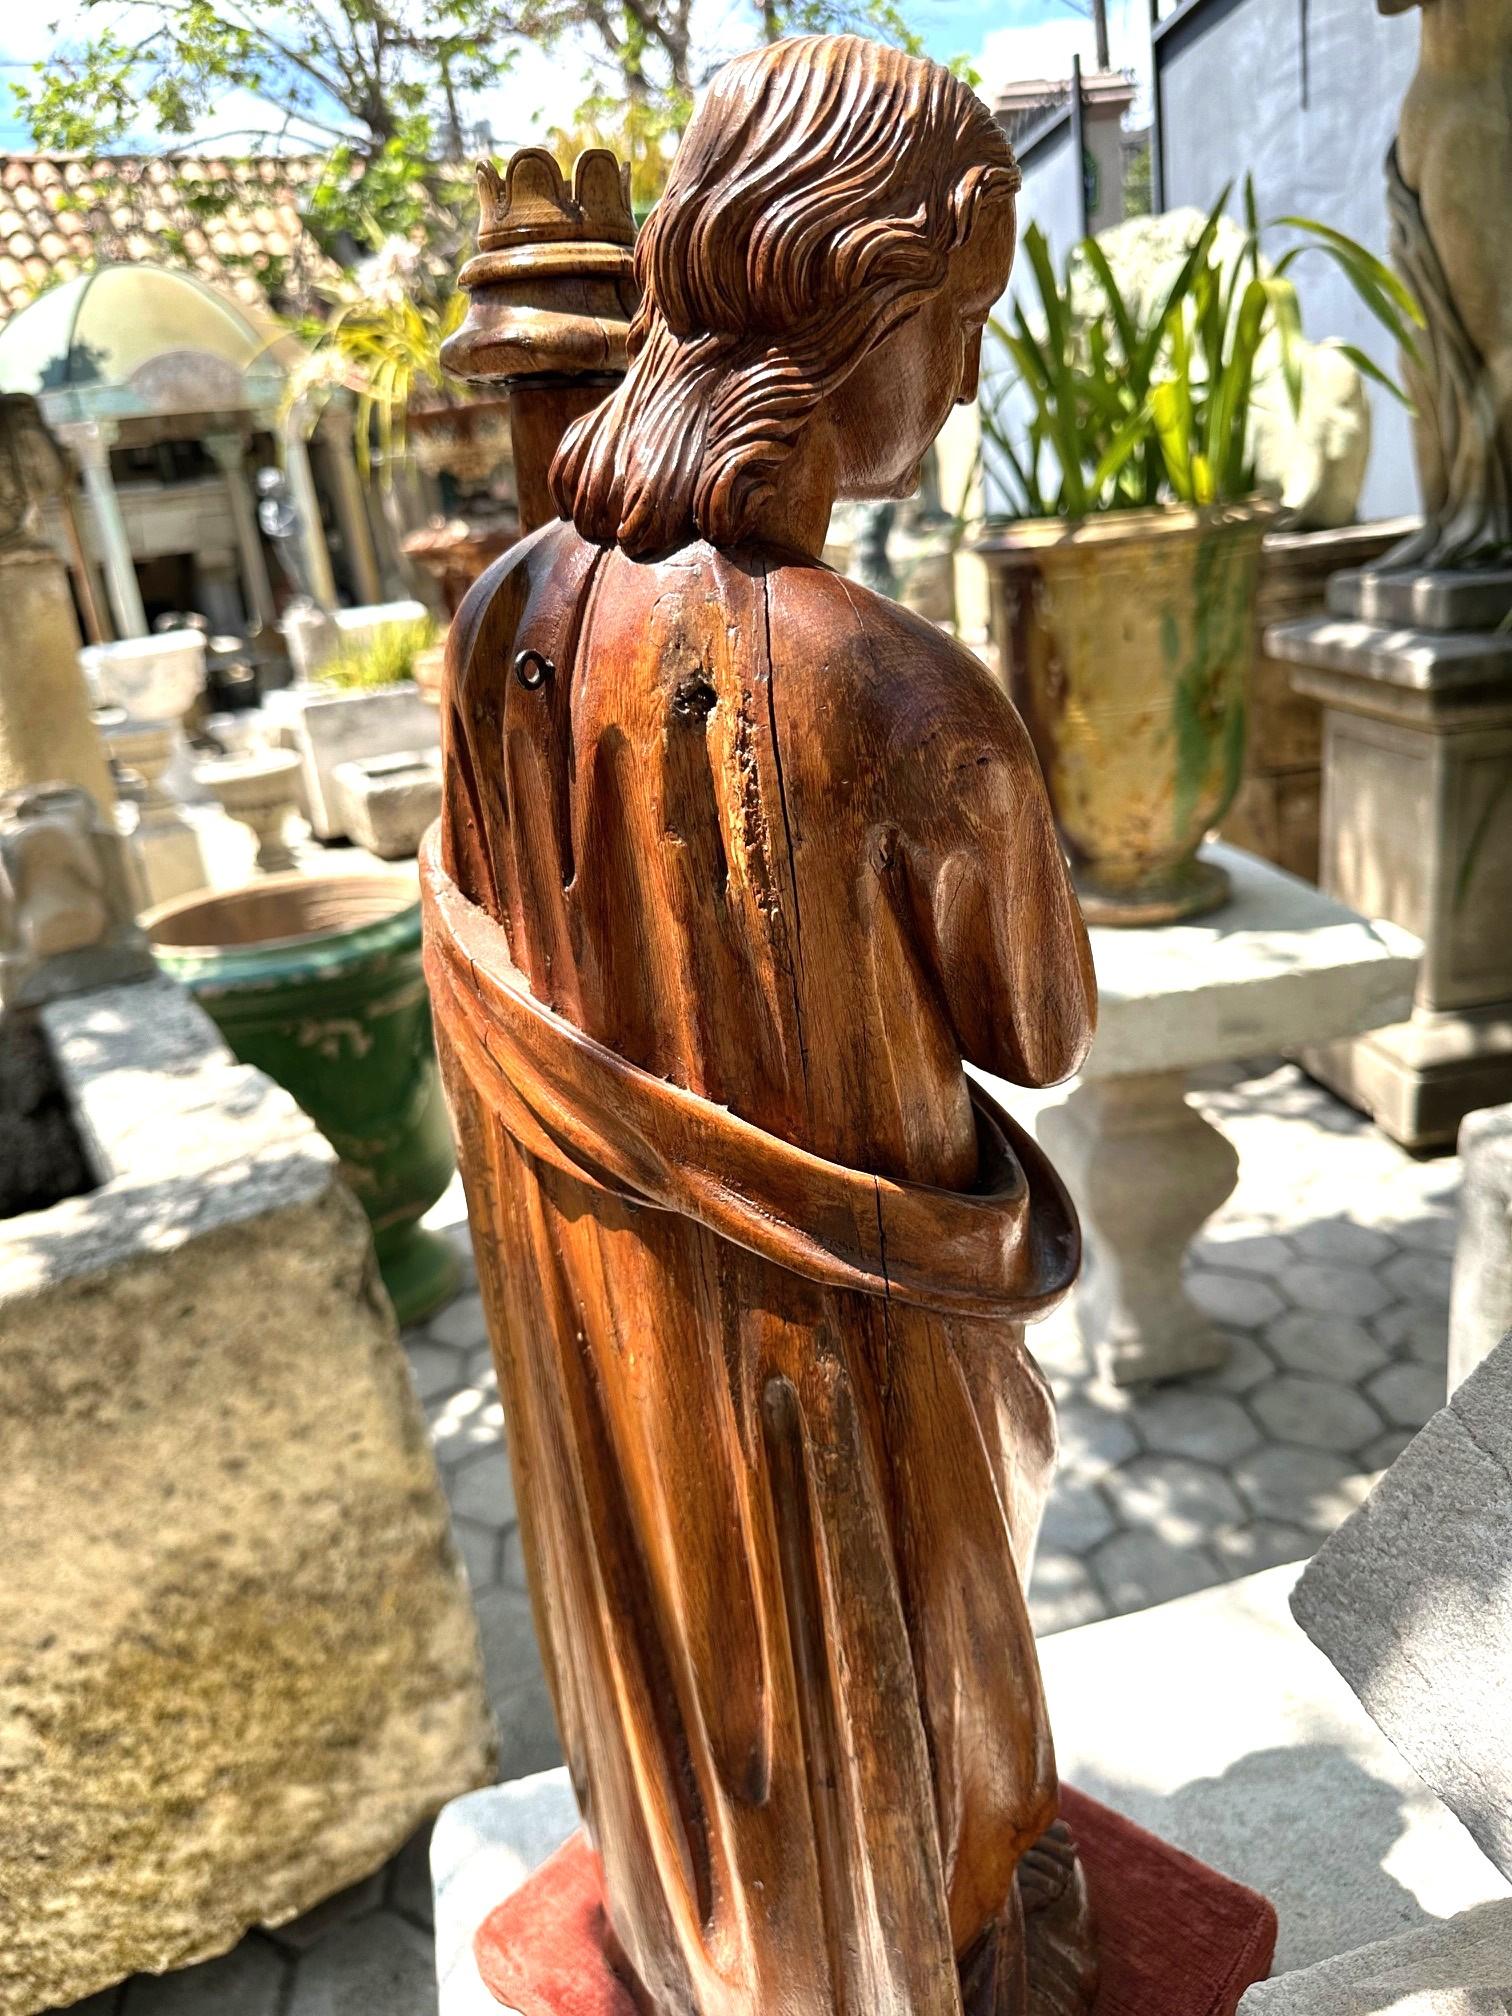 19th Century Hand Carved Wood Figure Sculpture Angel Statue Antiques Los Angeles California For Sale